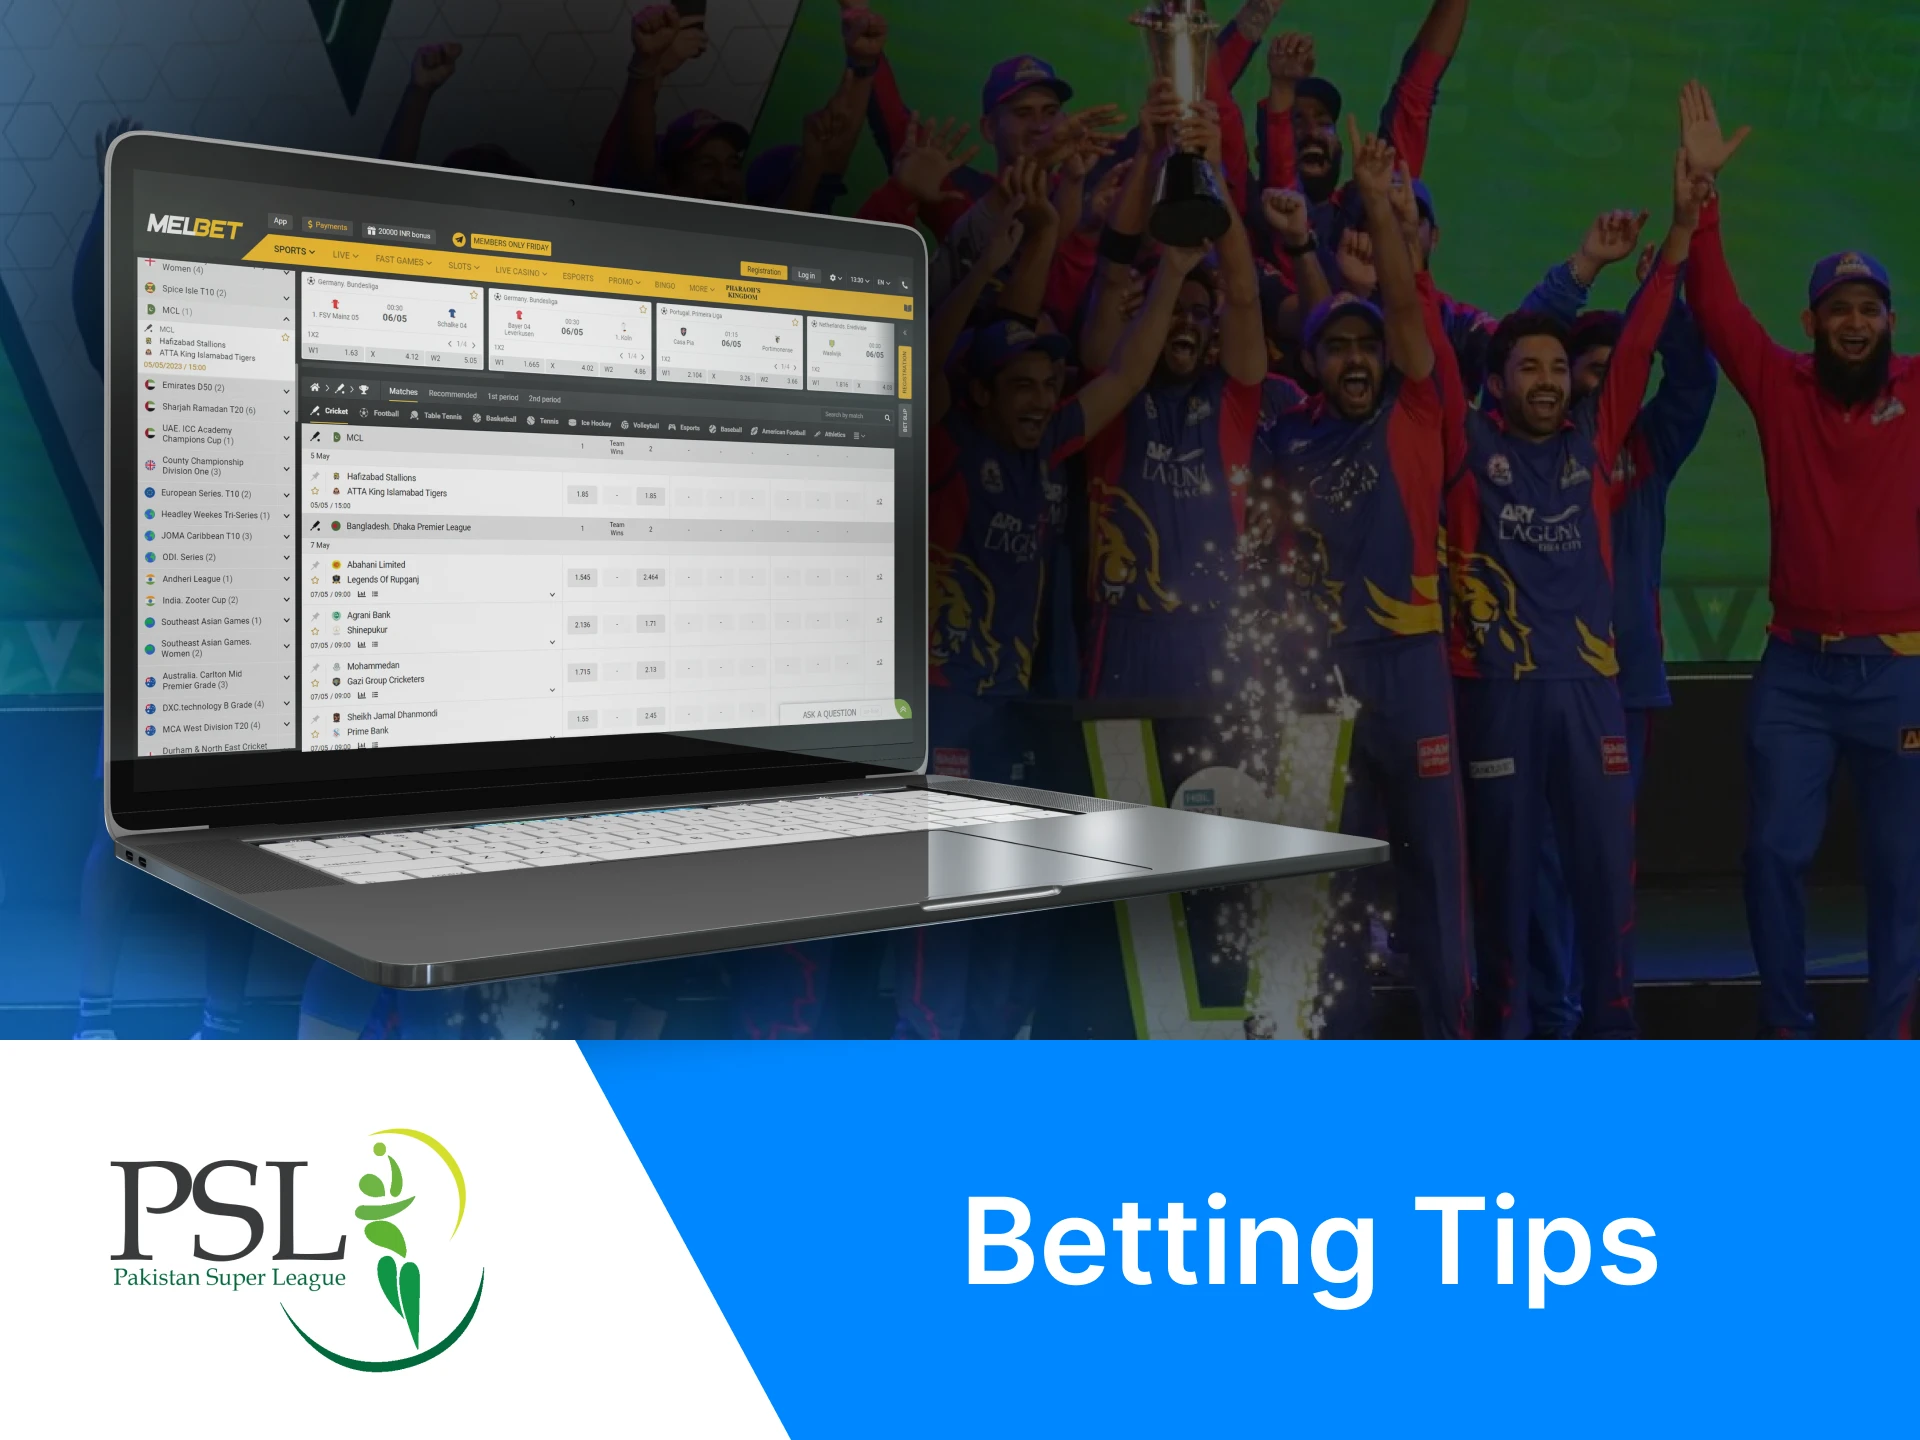 Follow our tips to increase your chances in cricket betting.